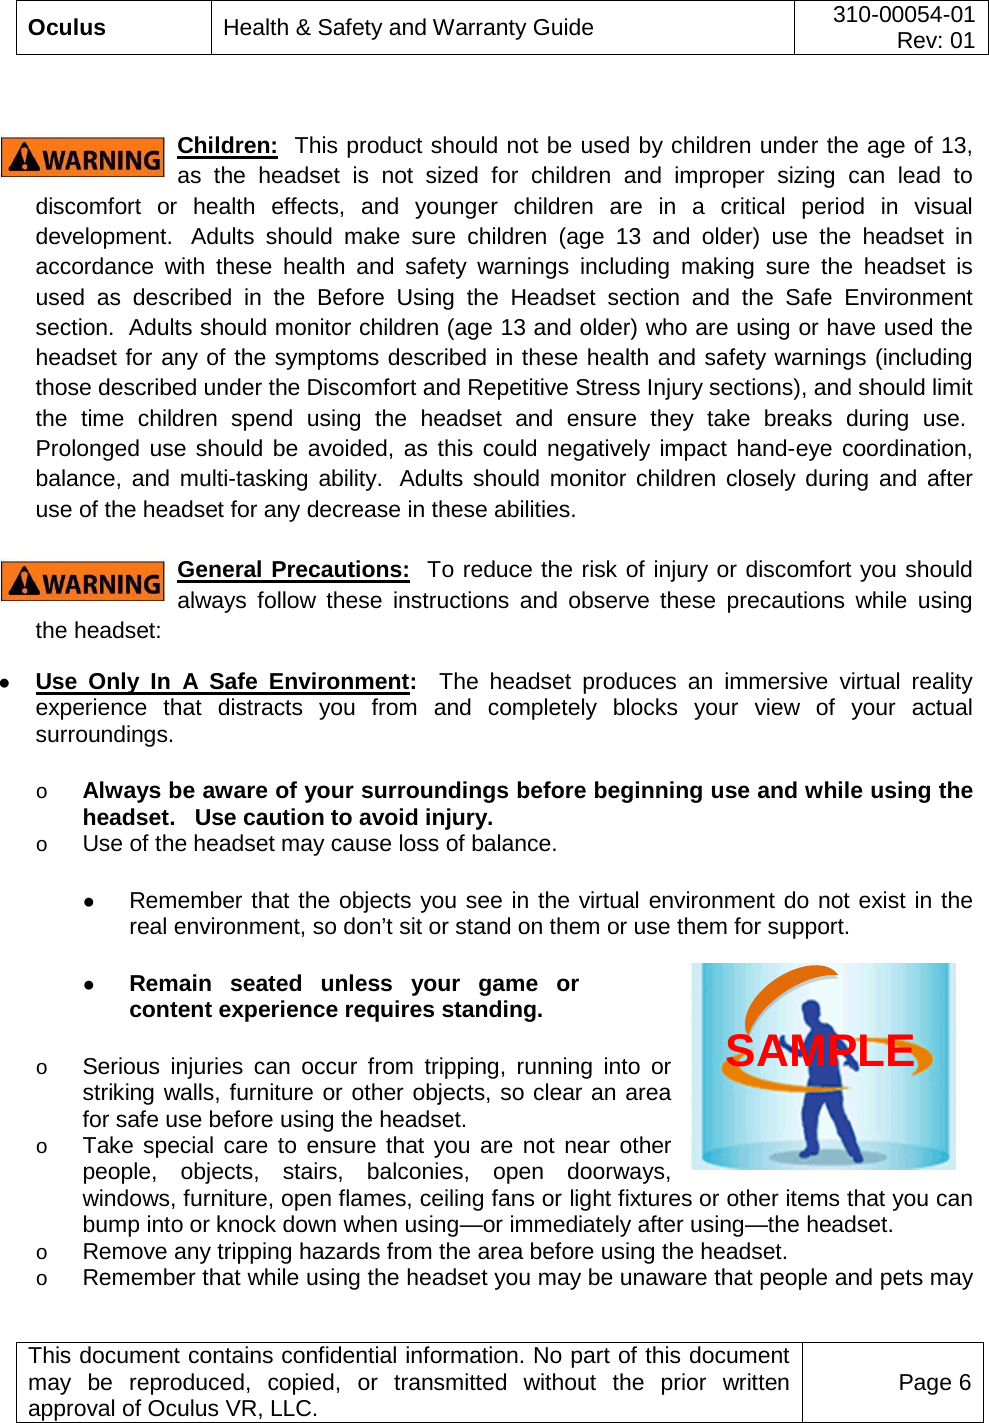  Oculus Health &amp; Safety and Warranty Guide 310-00054-01  Rev: 01   This document contains confidential information. No part of this document may be reproduced, copied, or transmitted without the prior written approval of Oculus VR, LLC. Page 6   Children:  This product should not be used by children under the age of 13, as the headset is not sized for children and improper sizing can lead to discomfort or health effects, and younger children are in a critical period in visual development.   Adults should make sure children (age 13 and older) use the headset in accordance with these health and safety warnings including making sure the headset is used as described in the Before Using the Headset section and the Safe Environment section.  Adults should monitor children (age 13 and older) who are using or have used the headset for any of the symptoms described in these health and safety warnings (including those described under the Discomfort and Repetitive Stress Injury sections), and should limit the time children spend using the headset and ensure they take breaks during use.  Prolonged use should be avoided, as this could negatively impact hand-eye coordination, balance, and multi-tasking ability.   Adults should monitor children closely during and after use of the headset for any decrease in these abilities.  General Precautions:  To reduce the risk of injury or discomfort you should always follow these instructions and observe these precautions while using the headset: ● Use Only In A Safe Environment:  The headset produces an immersive virtual reality experience that distracts you from and completely blocks your view of your actual surroundings.    o Always be aware of your surroundings before beginning use and while using the headset.   Use caution to avoid injury. o Use of the headset may cause loss of balance.    ● Remember that the objects you see in the virtual environment do not exist in the real environment, so don’t sit or stand on them or use them for support.  ● Remain seated unless your game or content experience requires standing.    o Serious injuries can occur from tripping, running into or striking walls, furniture or other objects, so clear an area for safe use before using the headset.   o Take special care to ensure that you are not near other people, objects, stairs, balconies, open doorways, windows, furniture, open flames, ceiling fans or light fixtures or other items that you can bump into or knock down when using—or immediately after using—the headset.  o Remove any tripping hazards from the area before using the headset.  o Remember that while using the headset you may be unaware that people and pets may SAMPLE 